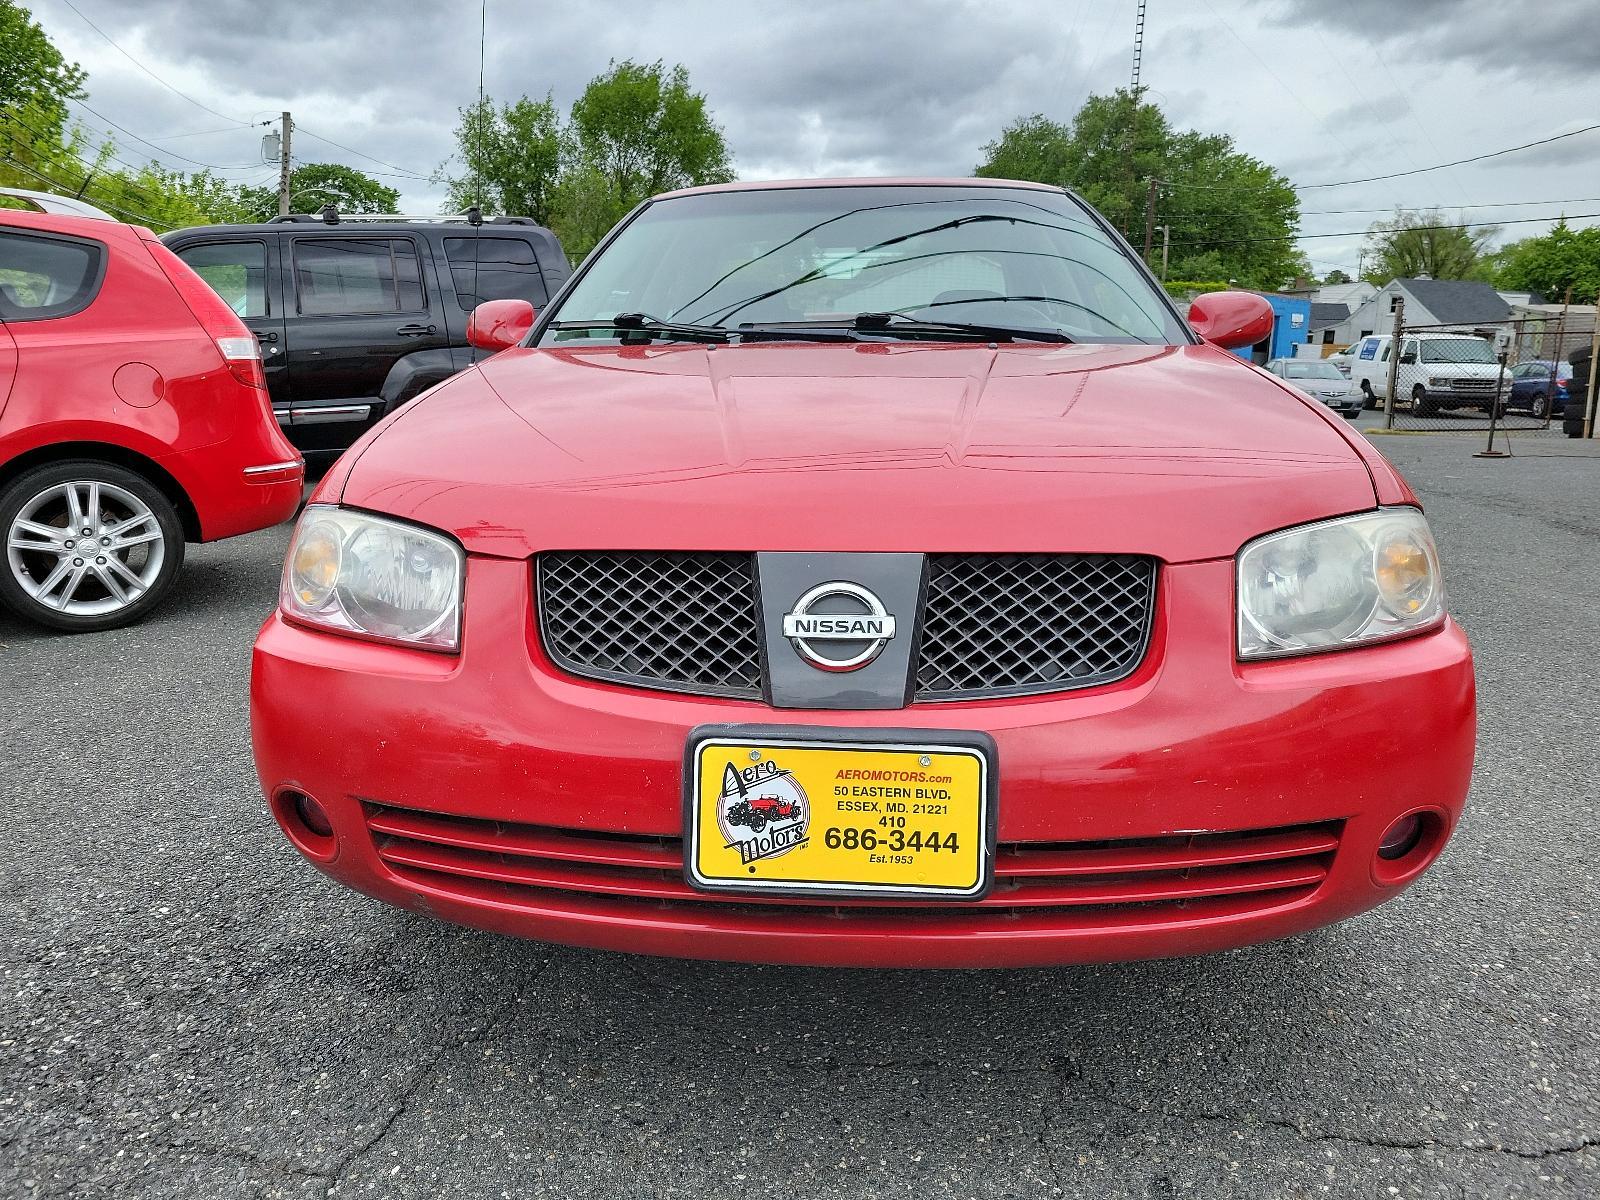 2006 Code Red - A20 /Charcoal - G Nissan Sentra 1.8 S (3N1CB51D06L) with an 1.8L SMPI DOHC 16-valve 4-cyl engine engine, located at 50 Eastern Blvd., Essex, MD, 21221, (410) 686-3444, 39.304367, -76.484947 - <p>Meet our 2006 Nissan Sentra S Sedan that looks sleek in Code Red! Powered by a 1.8 Liter 4 Cylinder generating 126hp connected to the 4 Speed Automatic transmission. This Front Wheel Drive sedan was built to perform while earning up to 34mpg on the highway! The exterior of our Sentra stands out w - Photo #1